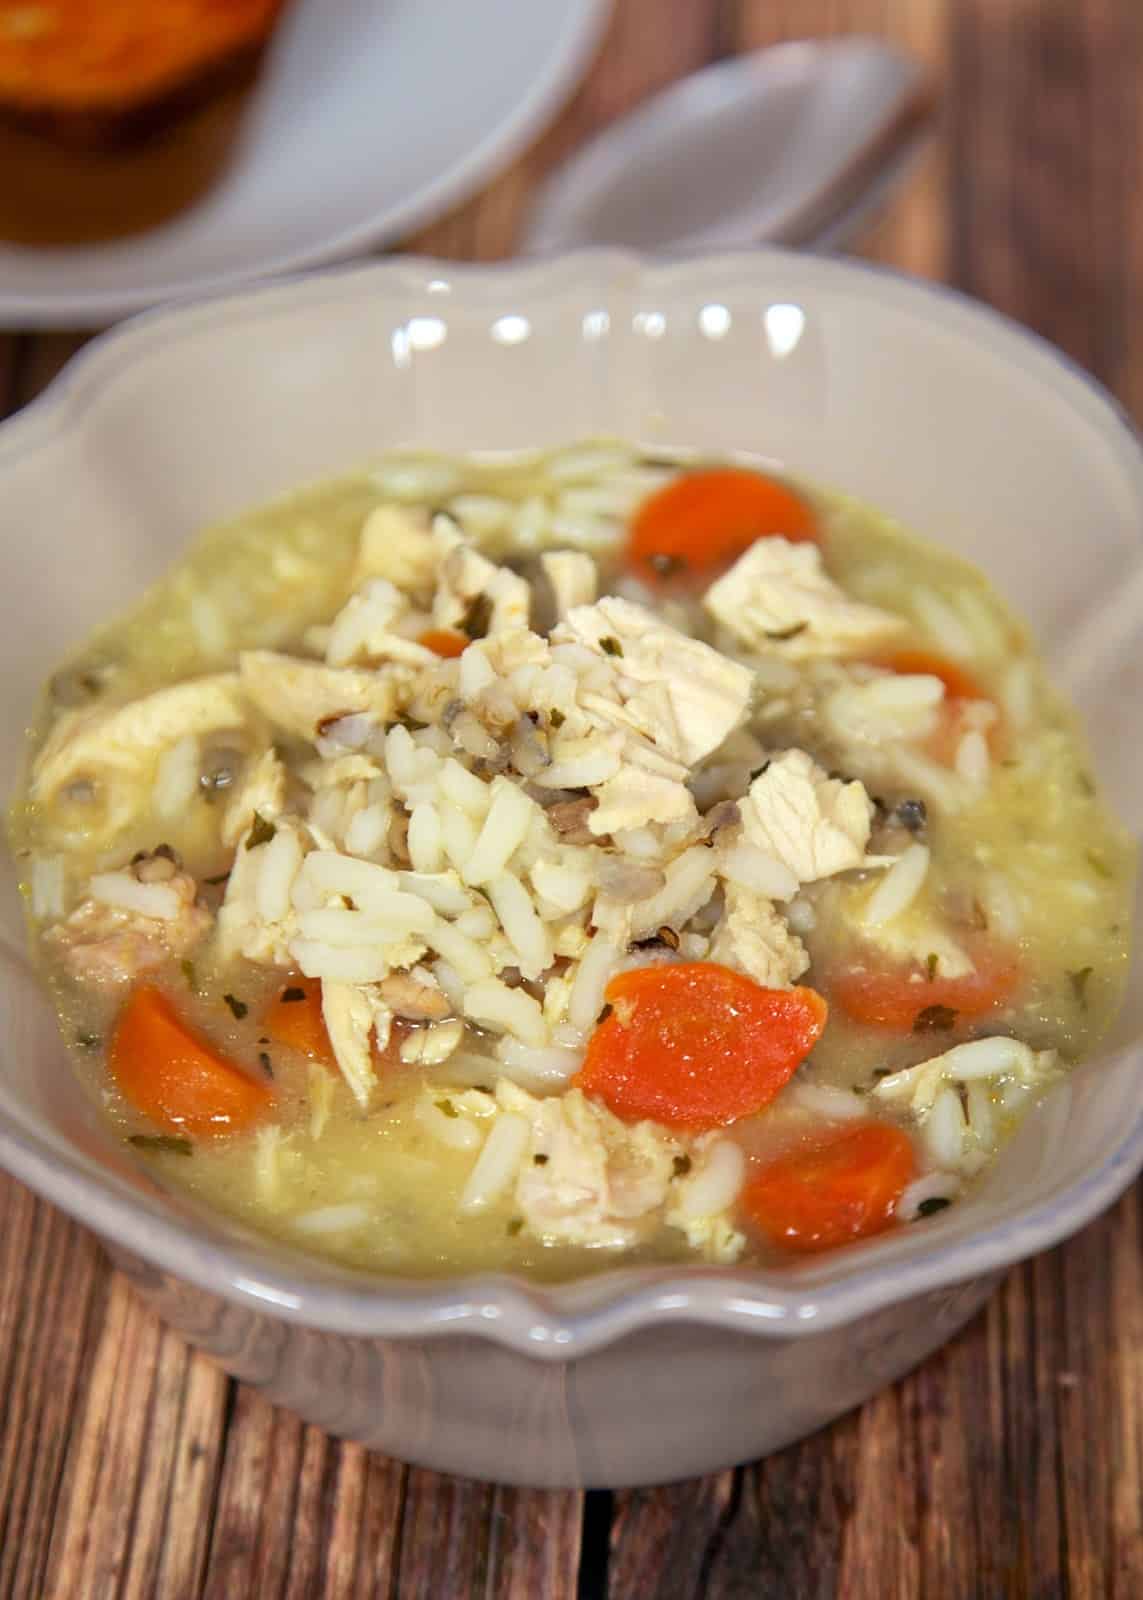 Slow Cooker Chicken and Wild Rice Soup - chicken, carrots, long grain and wild rice, and chicken broth - cooks all day in the slow cooker. Tastes great. Freezes well too!